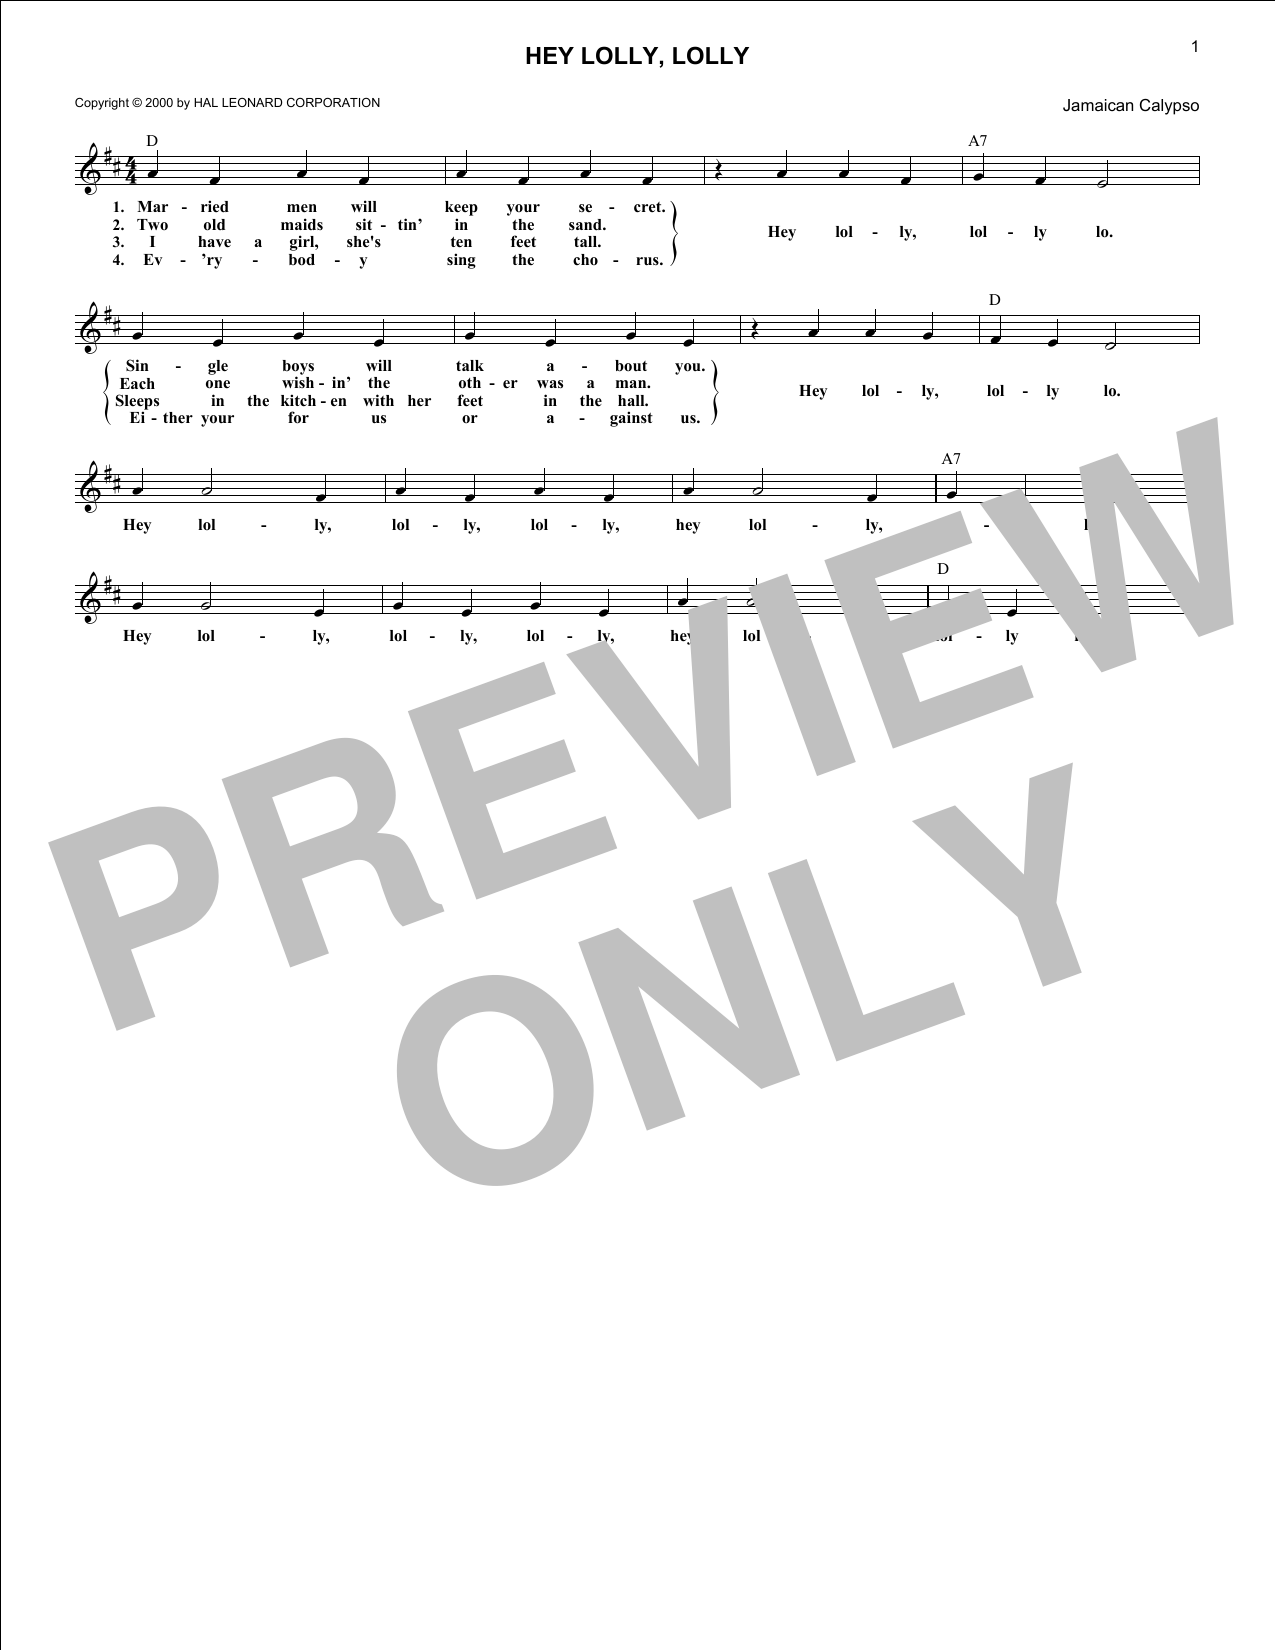 Download Traditional Calypso Song Hey Lolly, Lolly Sheet Music